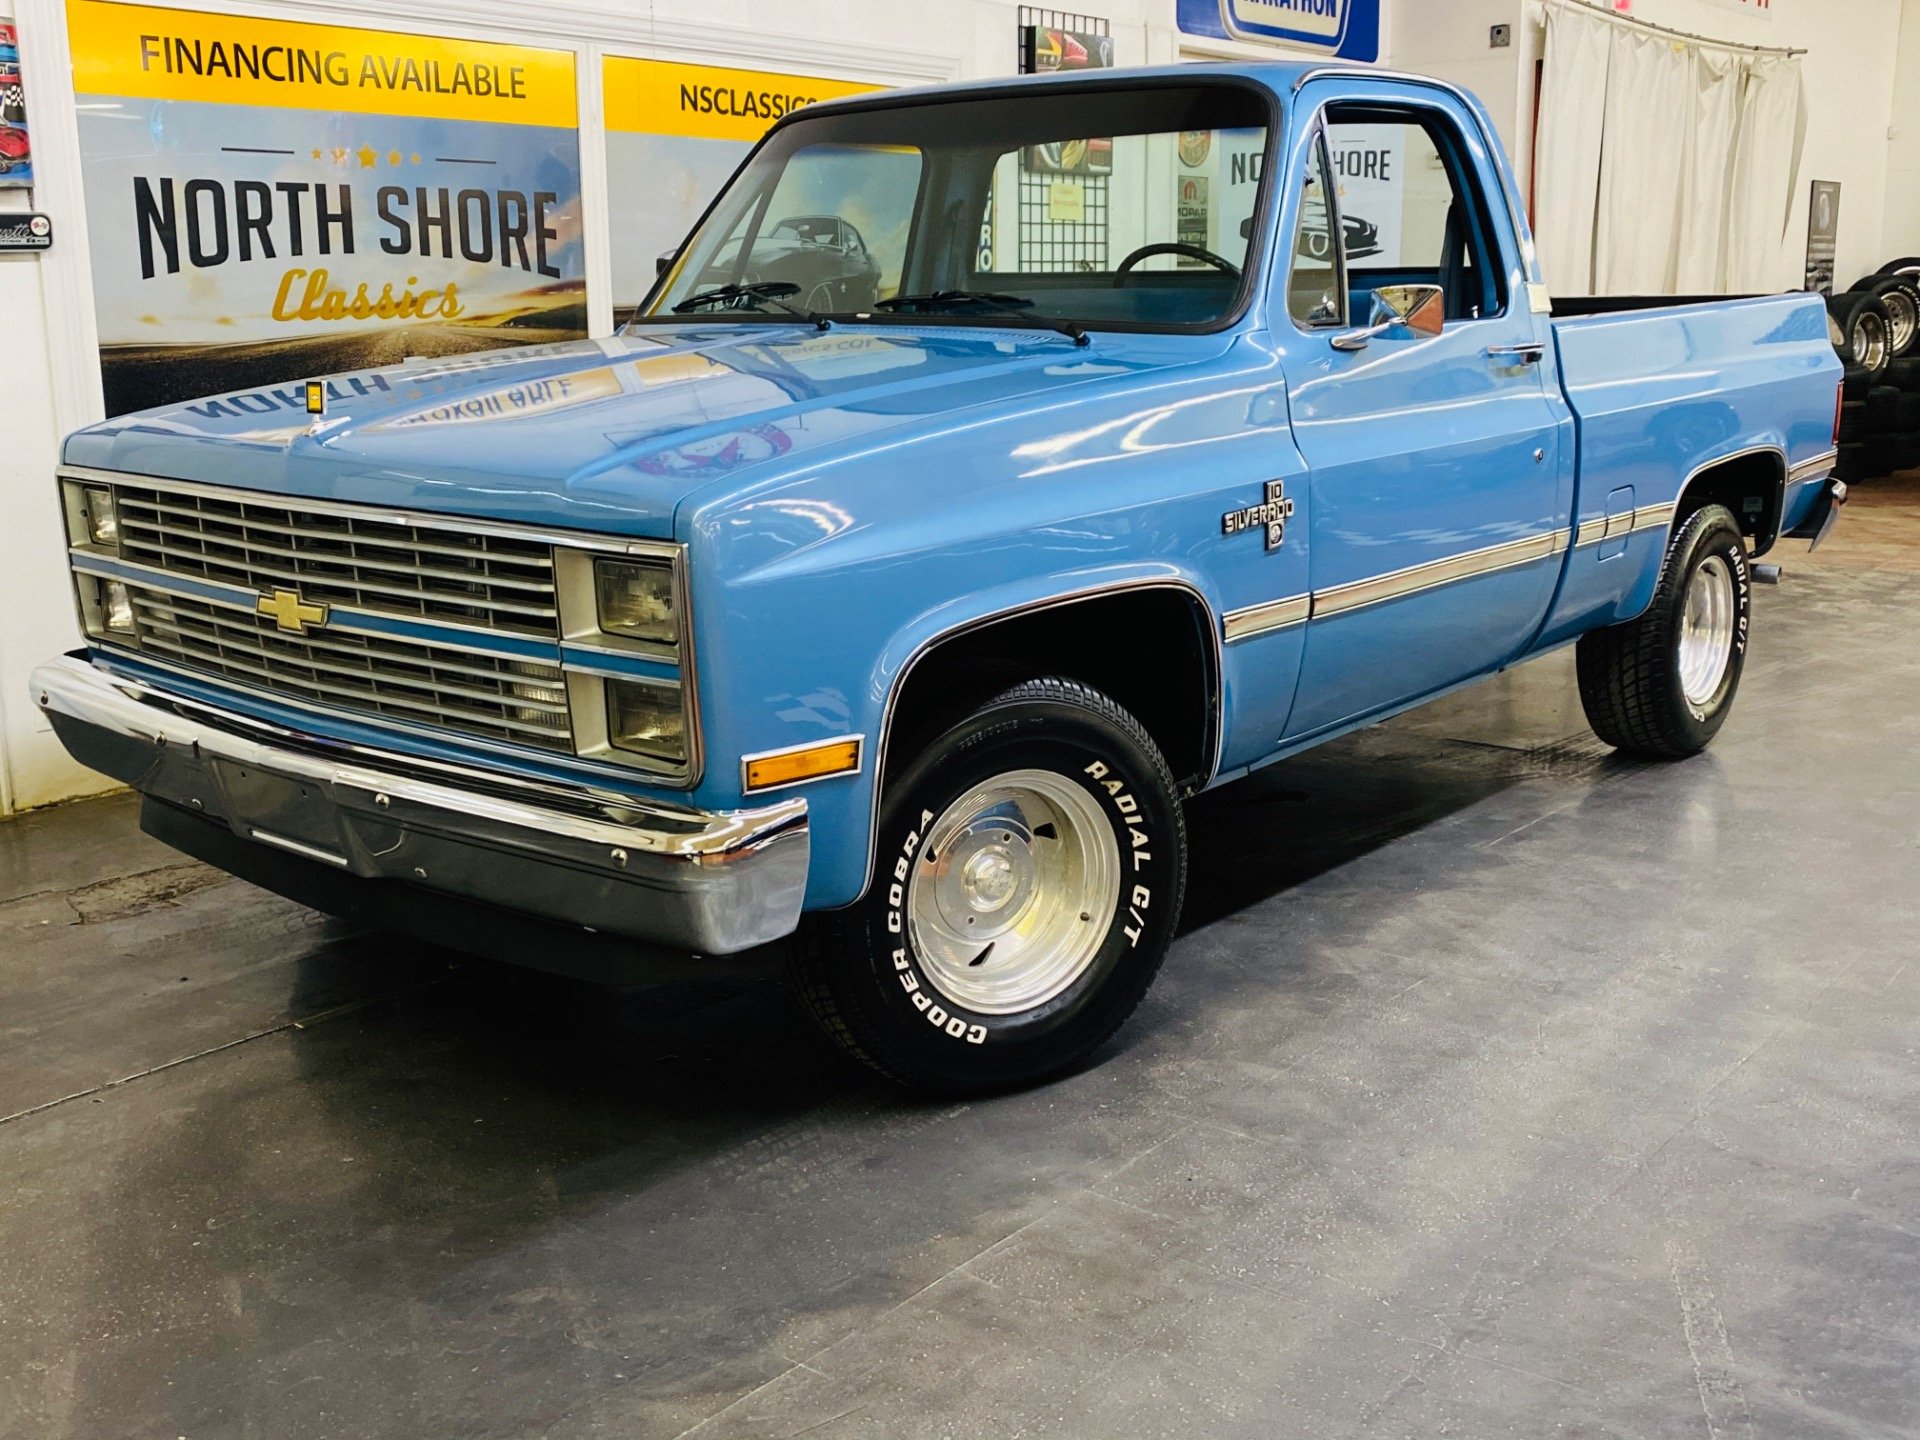 Used 1984 Chevrolet Pickup -C10 SILVERADO PAINT A C SYSTEM - (Sold). North Shore Classics Stock BCC